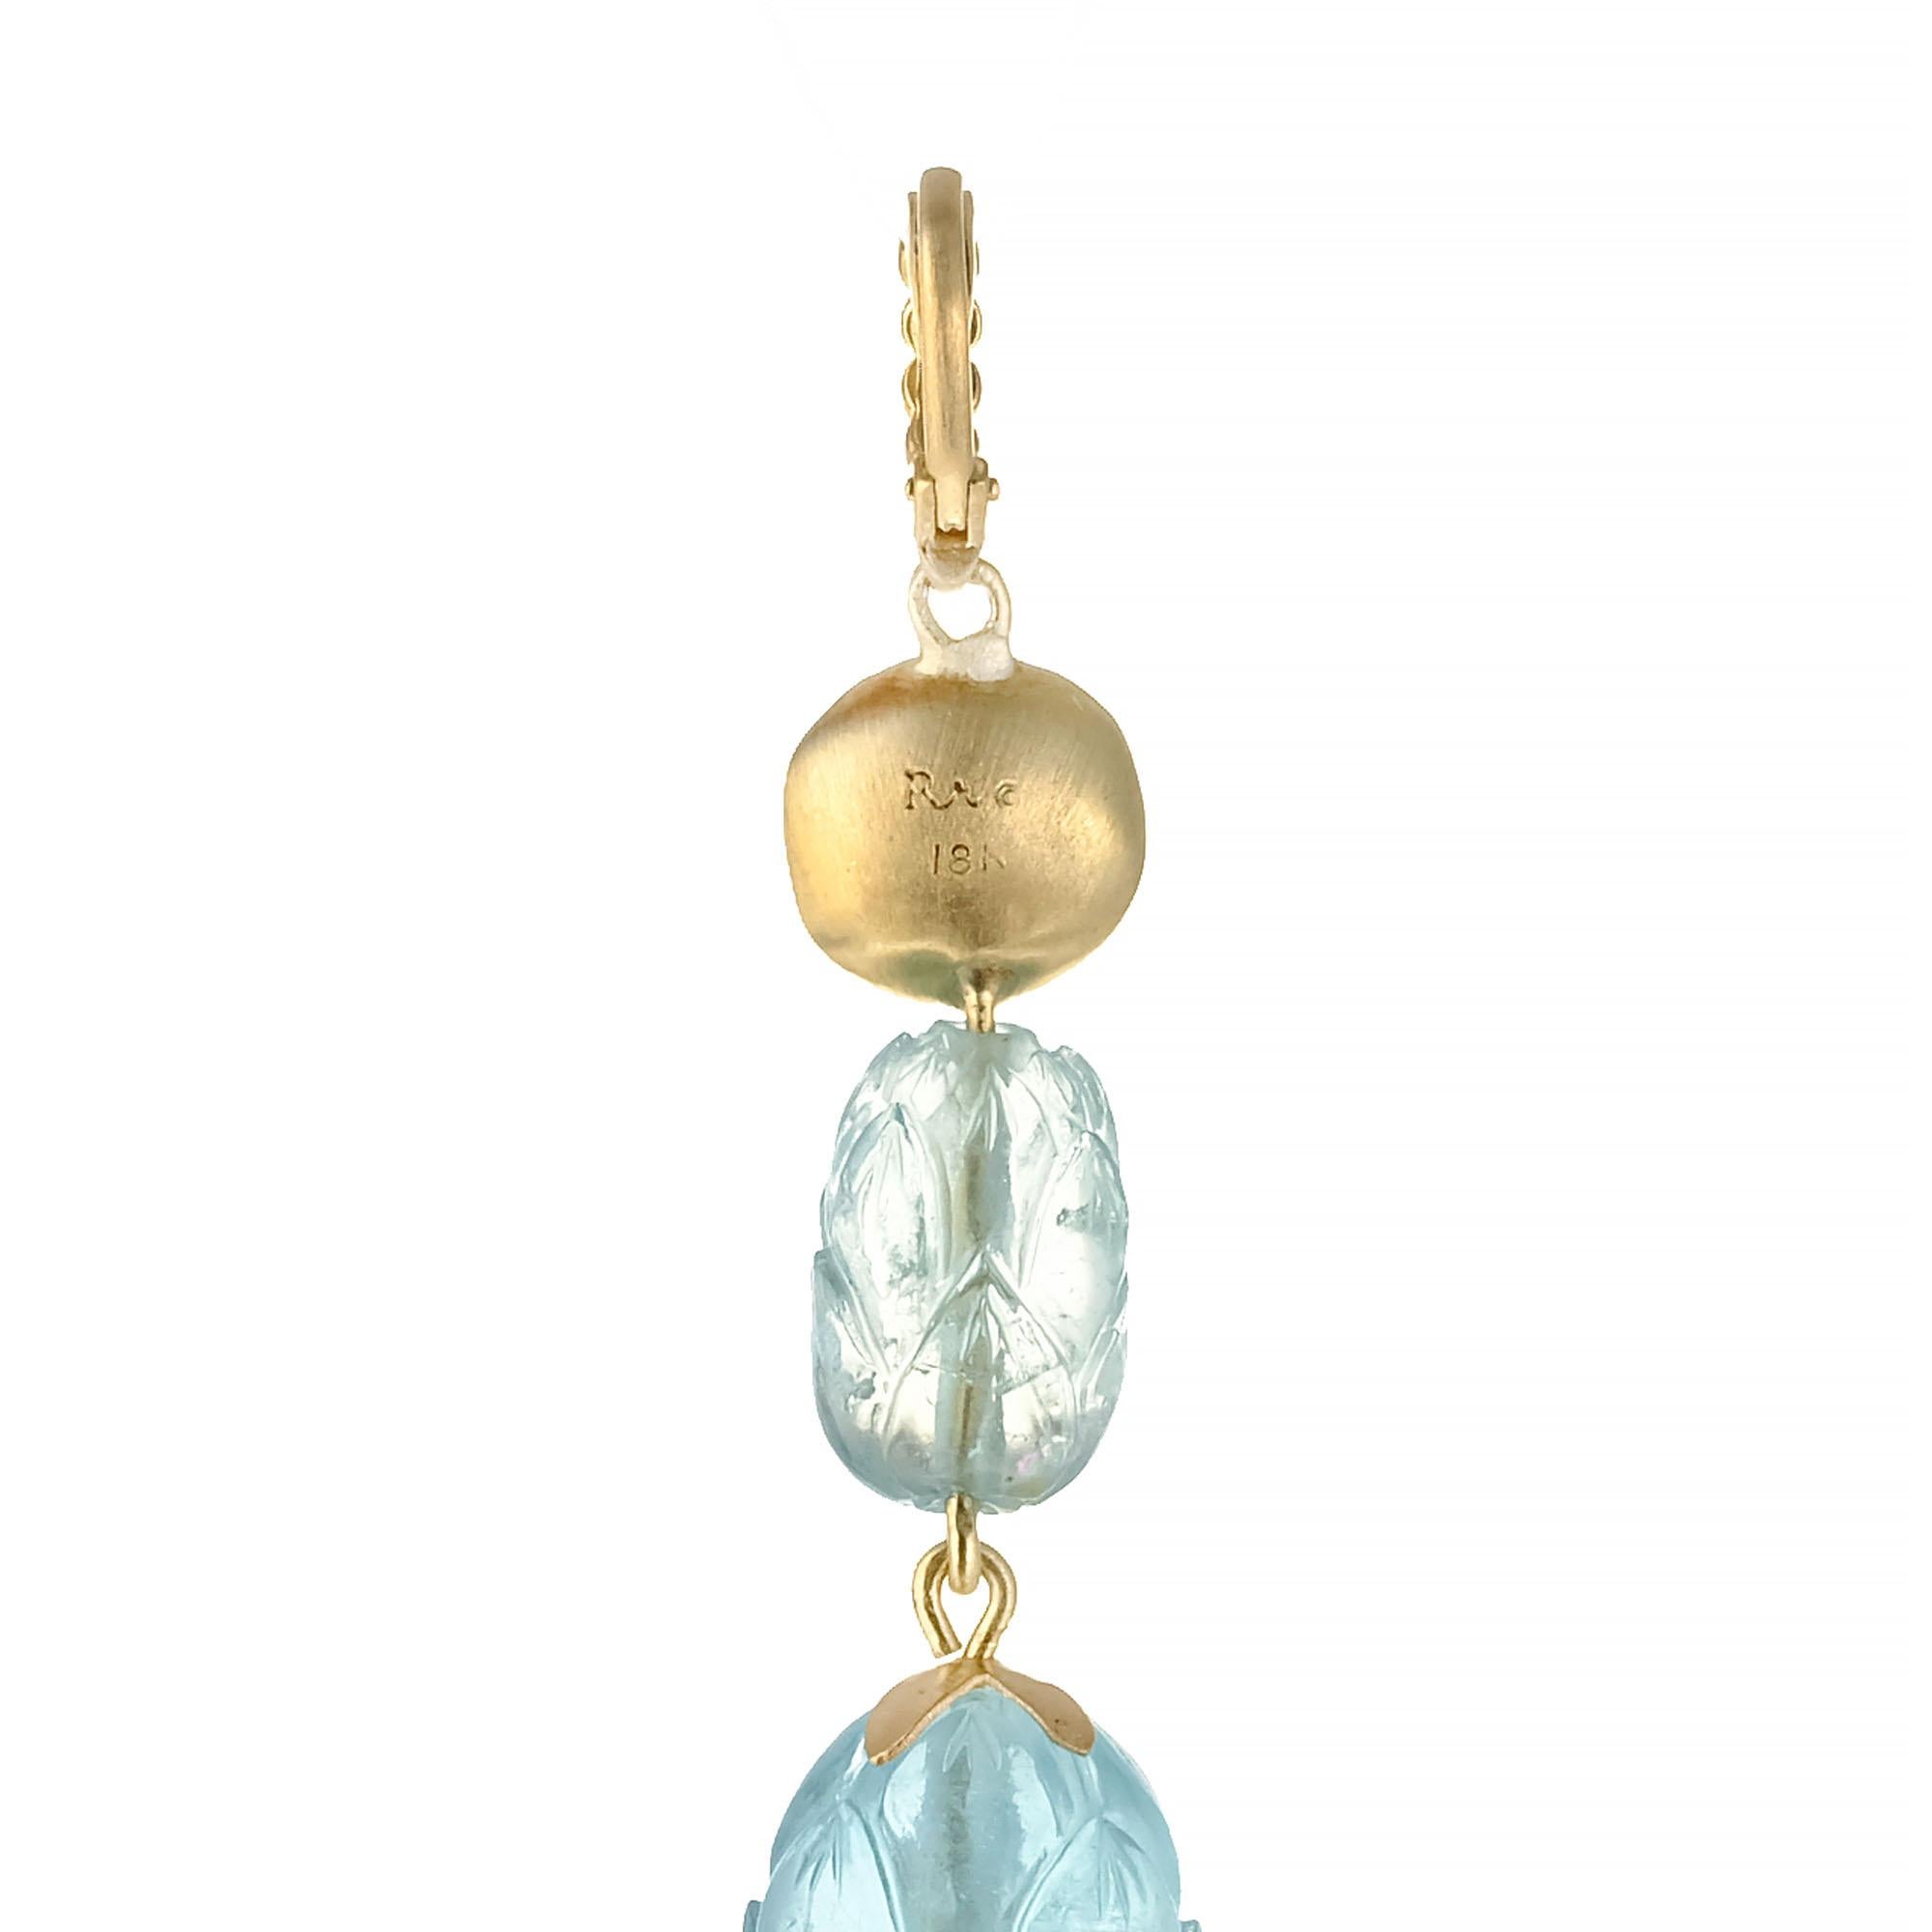 Robin Rotenier .19 Carat Carved Aquamarine Diamond Yellow Gold Pendant Enhancer In Excellent Condition For Sale In Stamford, CT